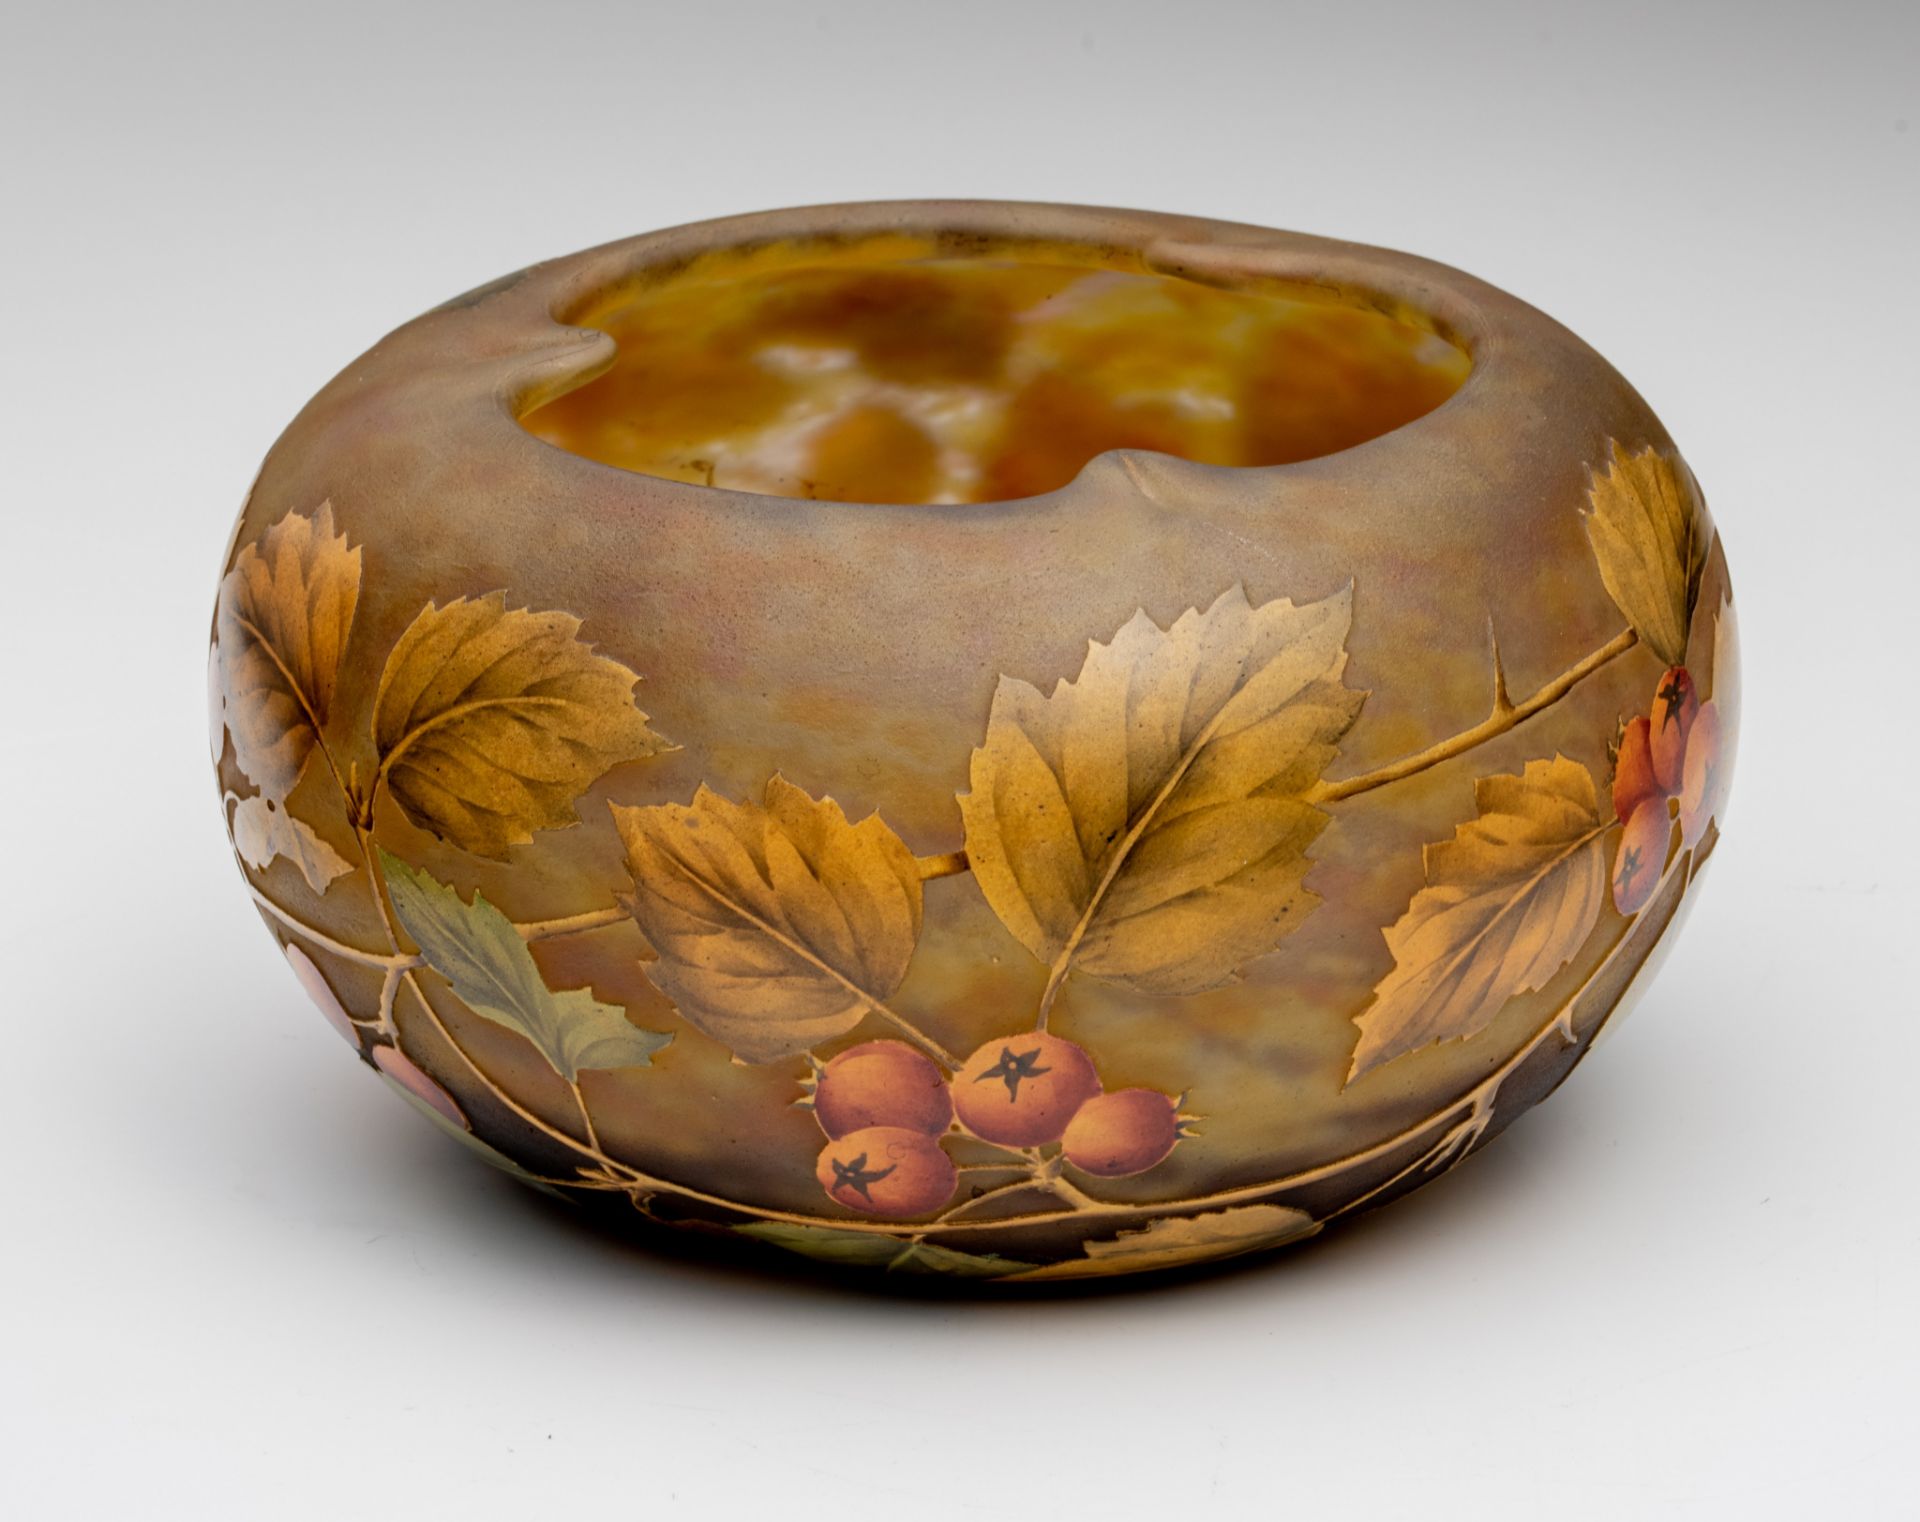 (BIDDING ONLY ON CARLOBONTE.BE) A large Art Nouveau style cameo glass paste bowl with floral decorat - Image 6 of 10